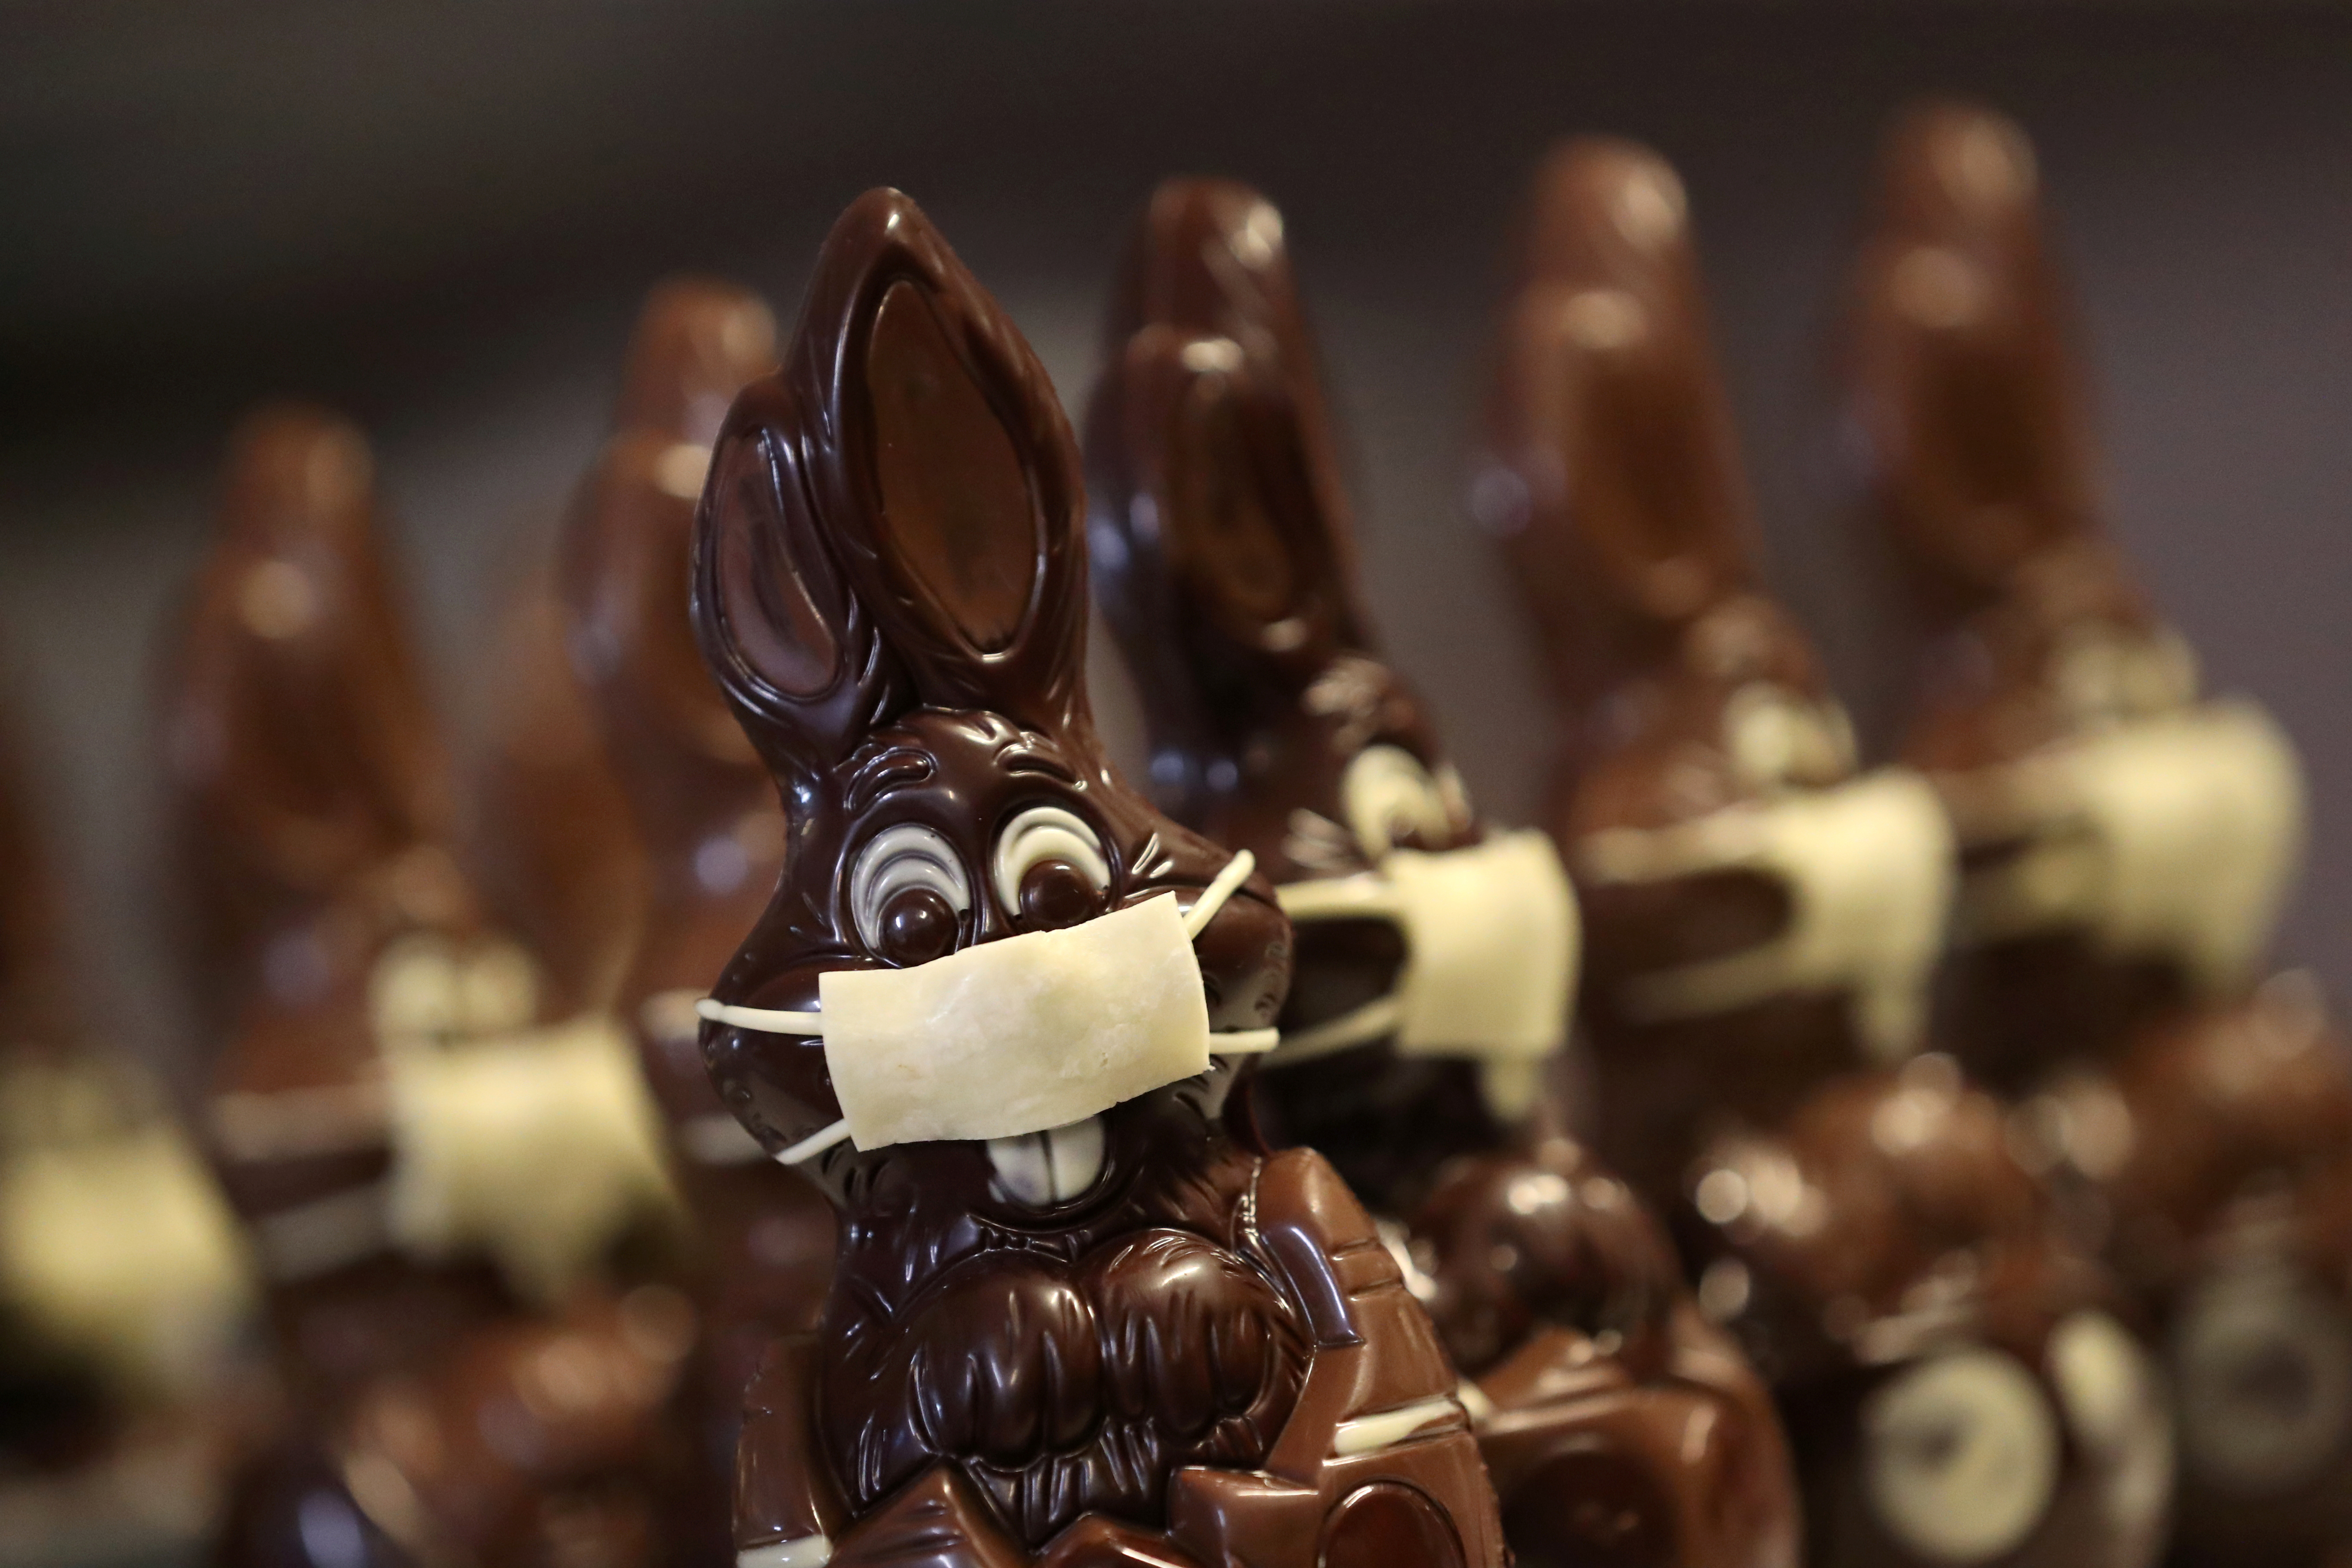 Not just people, chocolate Easter bunnies need to wear masks in Belgium too